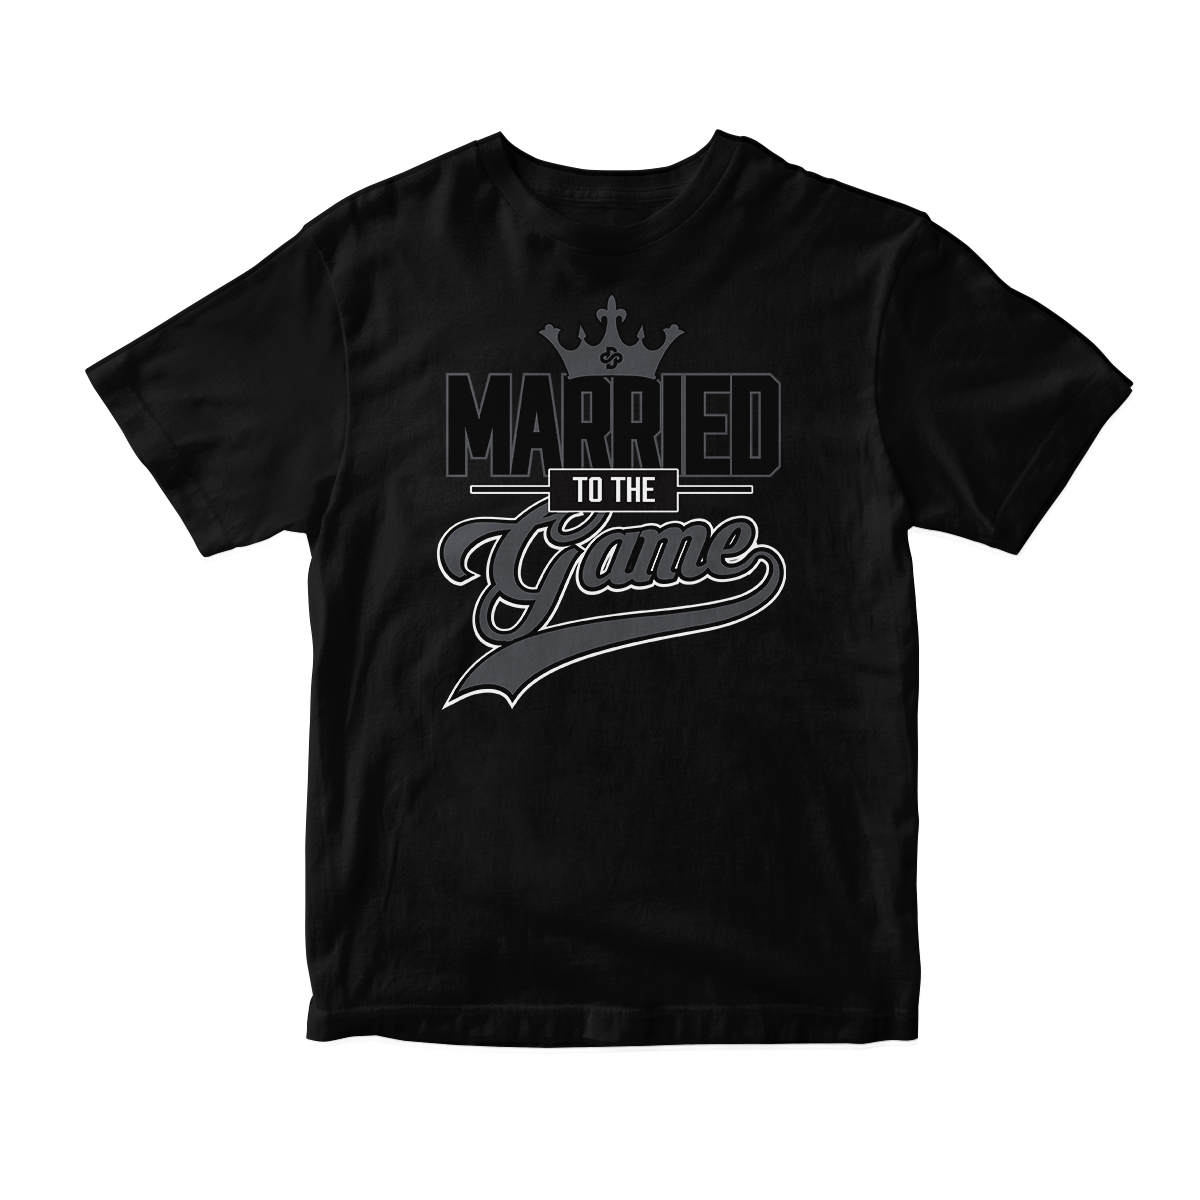 'Married To The Game' in Black Cat CW Short Sleeve Tee